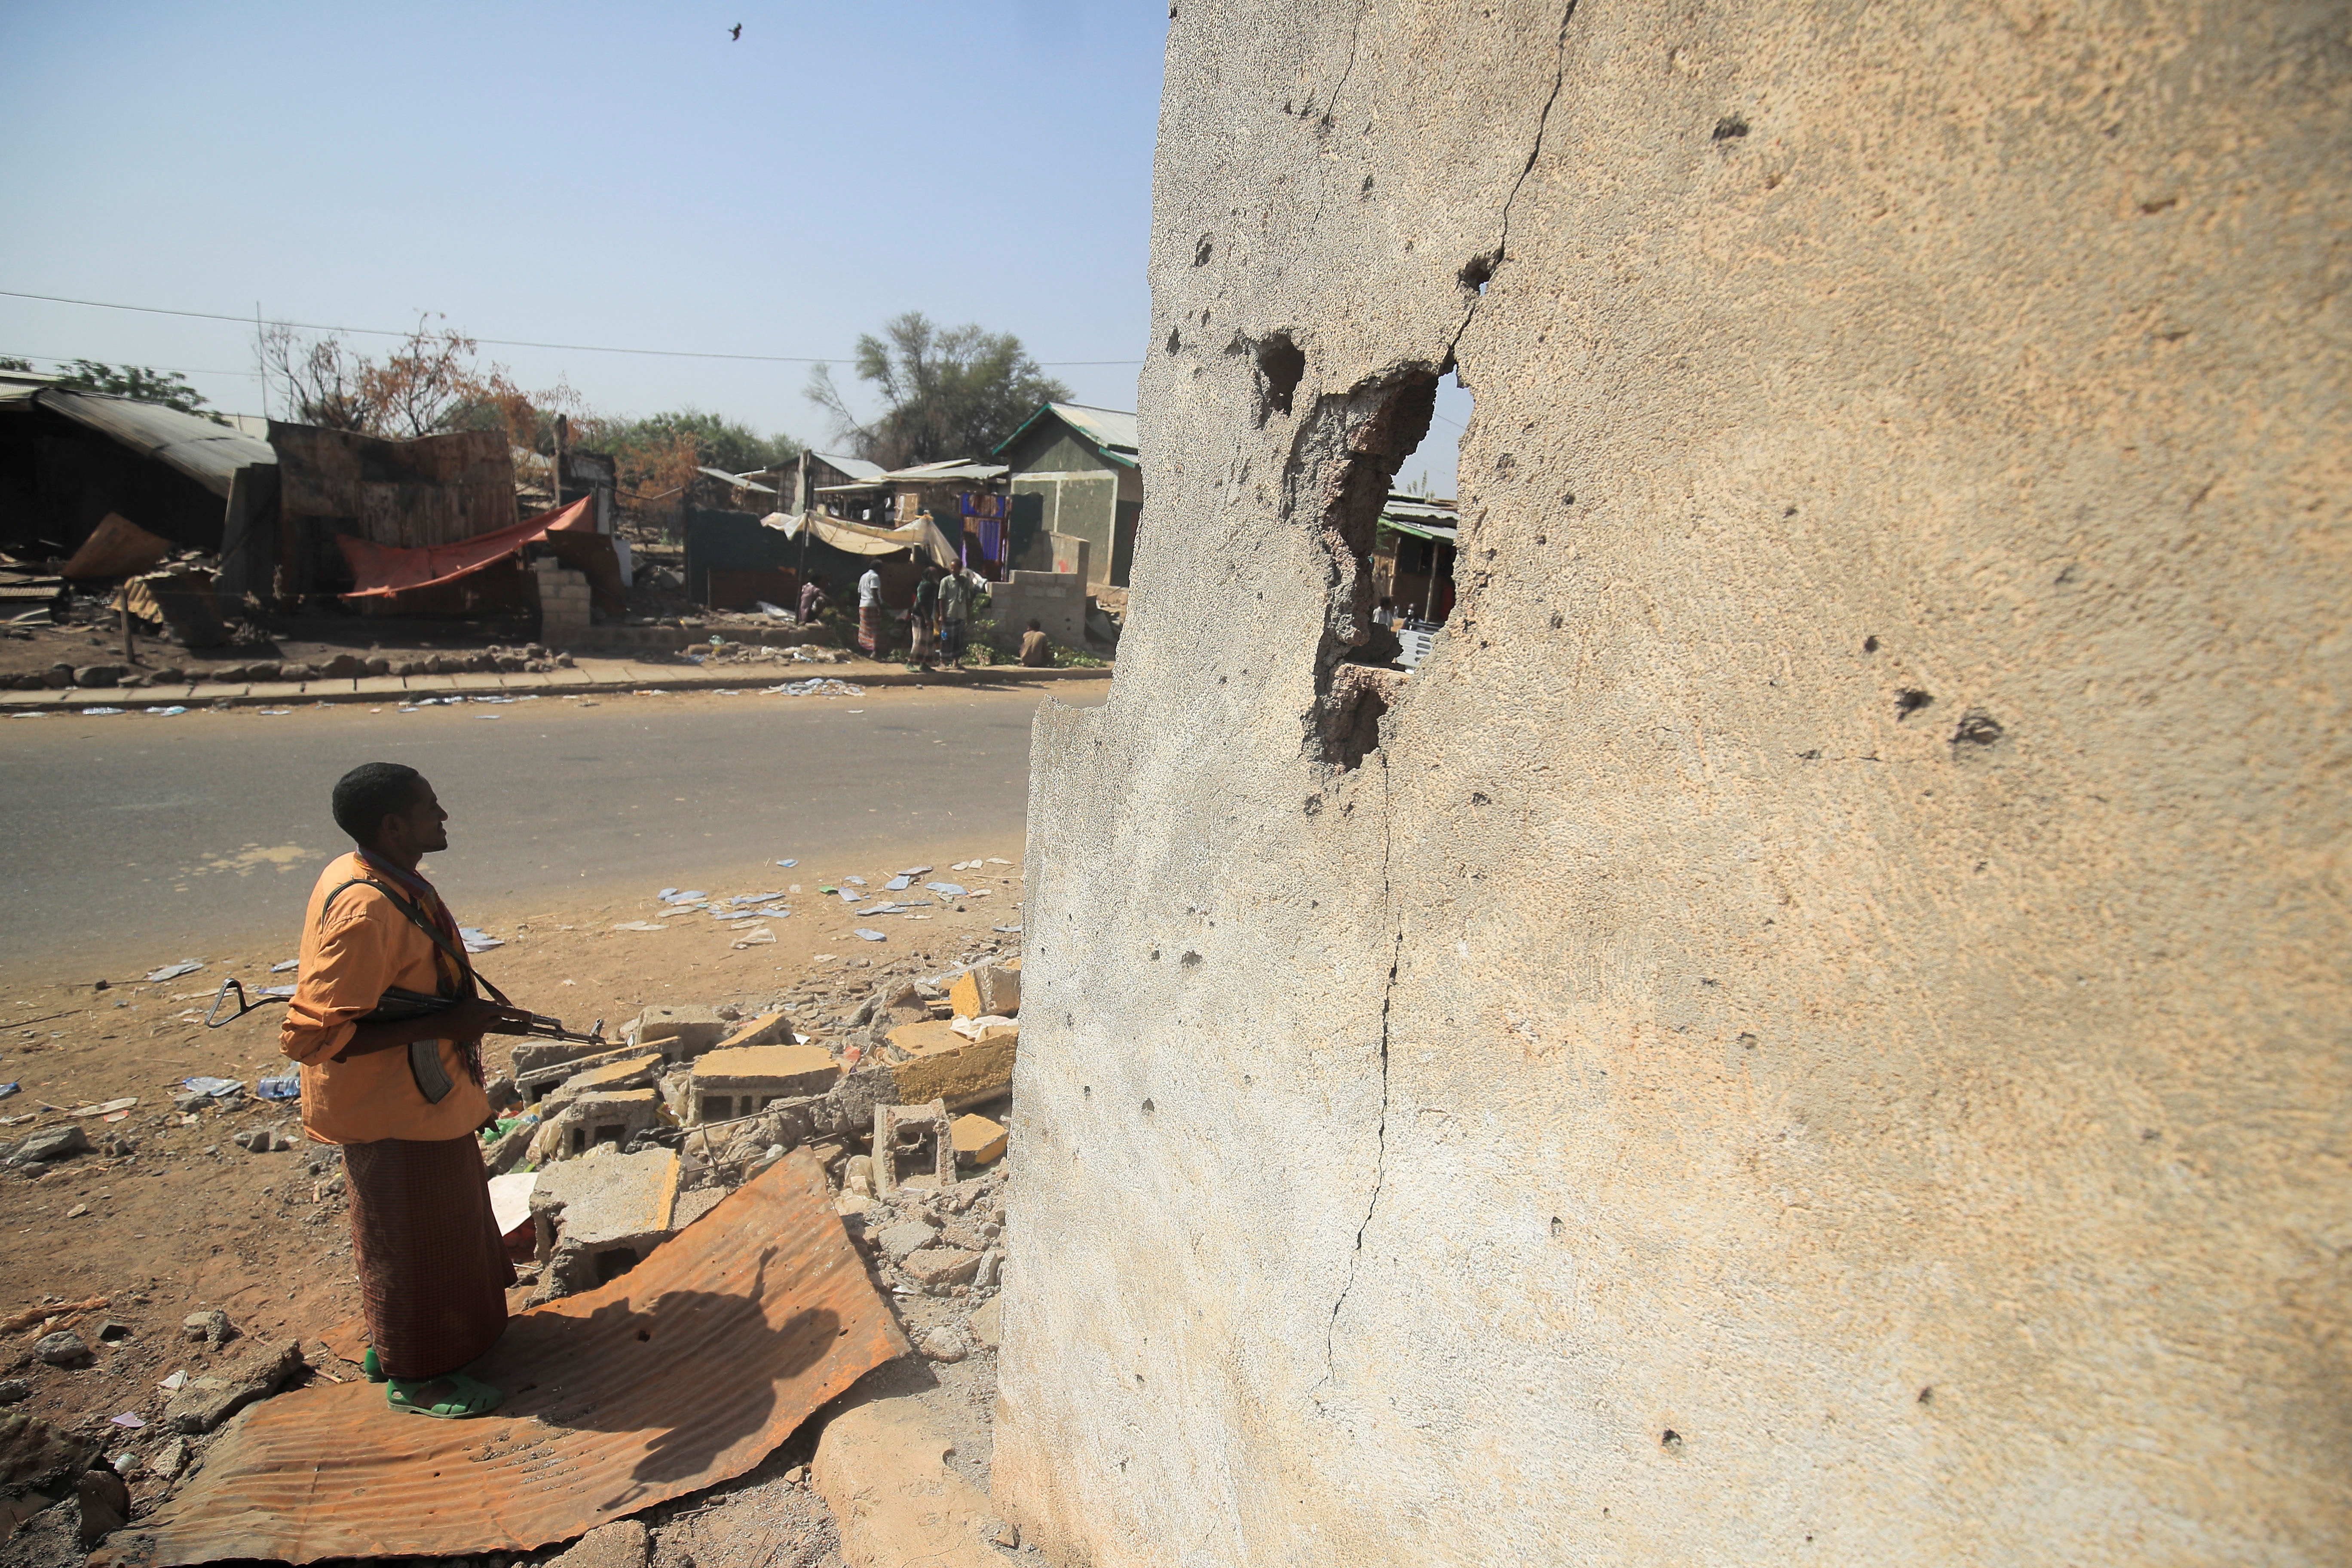 An armed militia stands next to a house damaged during the fight between the Ethiopian National Defence Forces (ENDF) and the Tigray People's Liberation Front (TPLF) forces, in Kasagita town